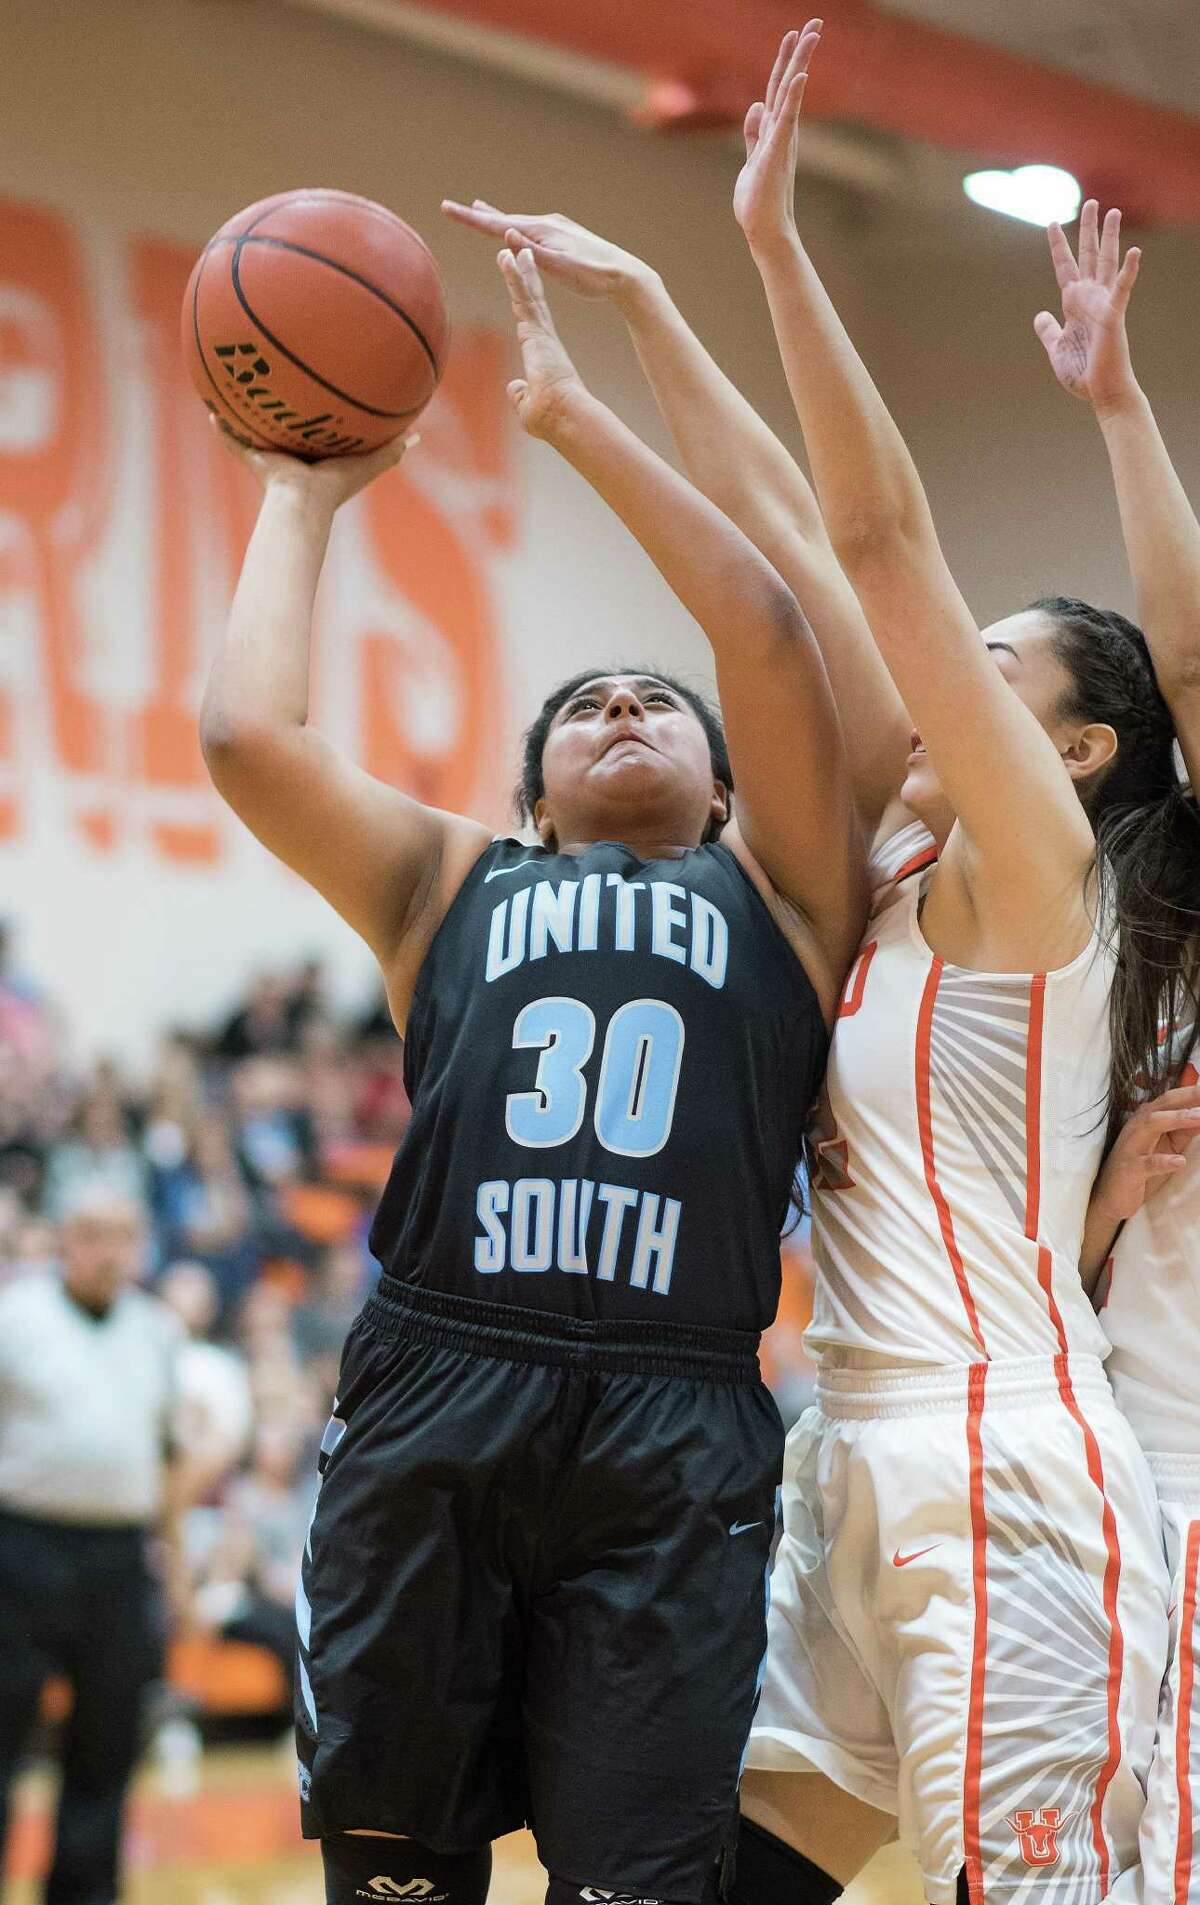 United South High School Evelyn Cruz shoots the ball as she is guarded by the United High School defense on Tuesday, January 24, 2017 at United High School.